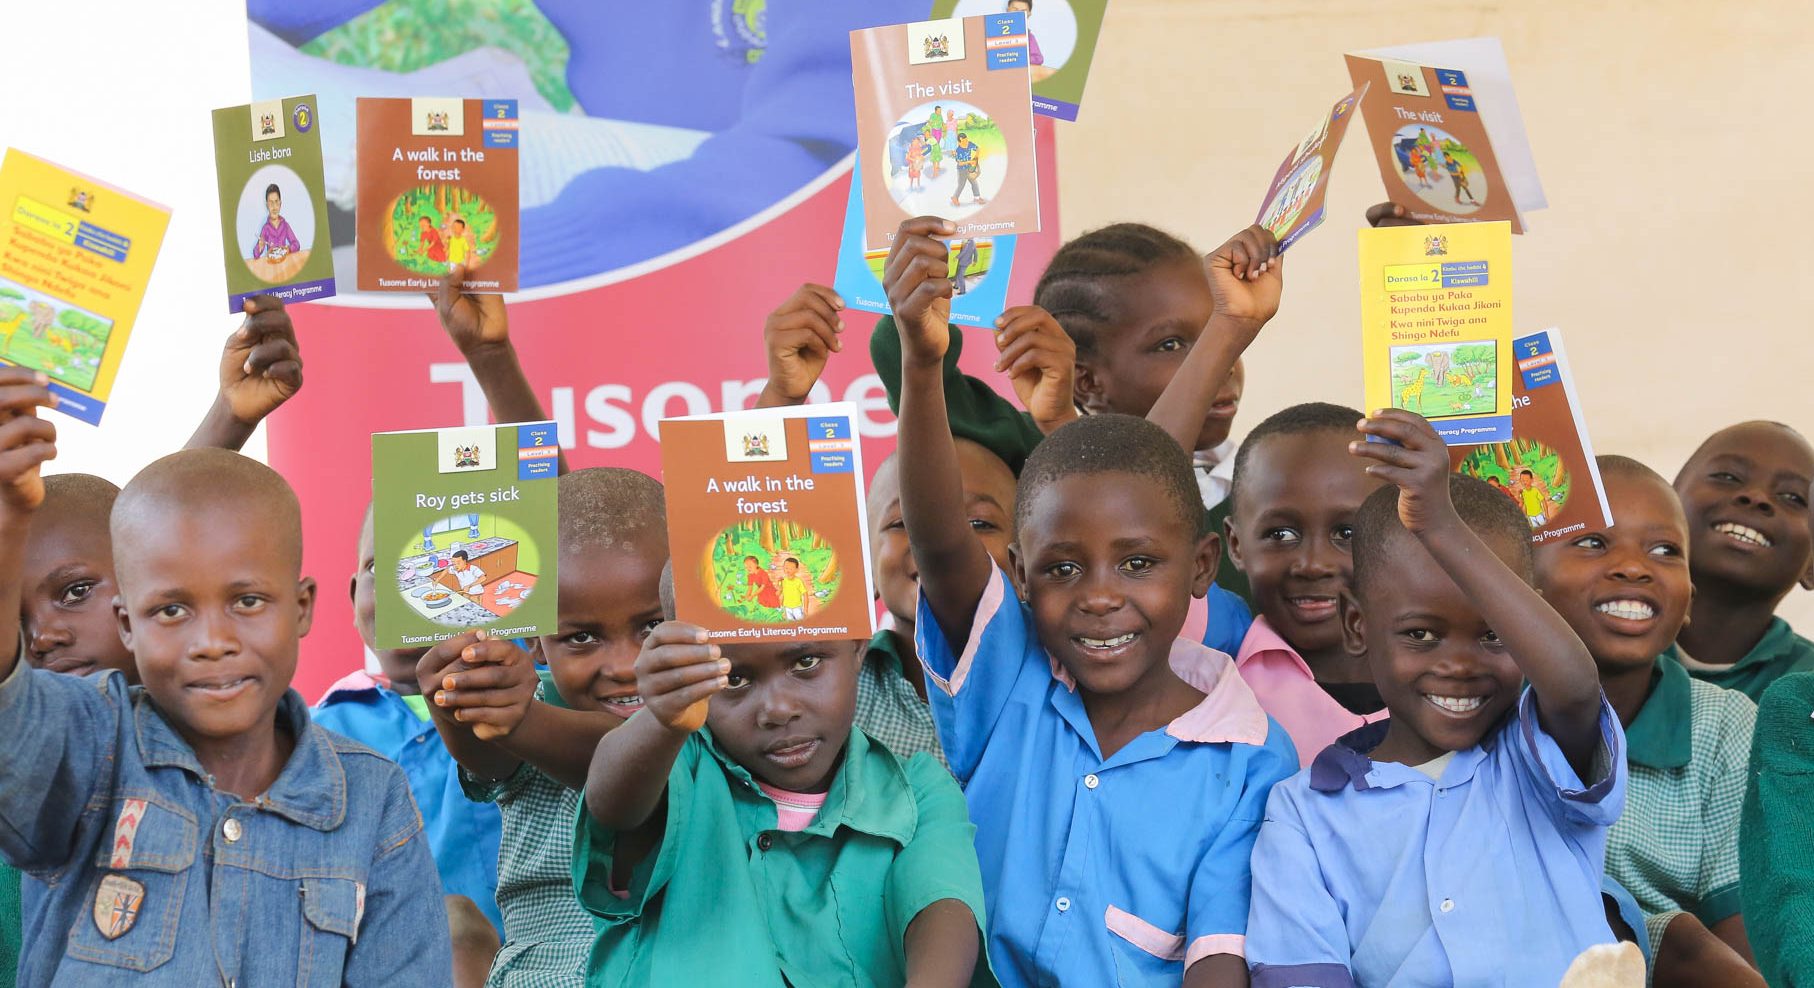 A group of school children from Kenya holding up books